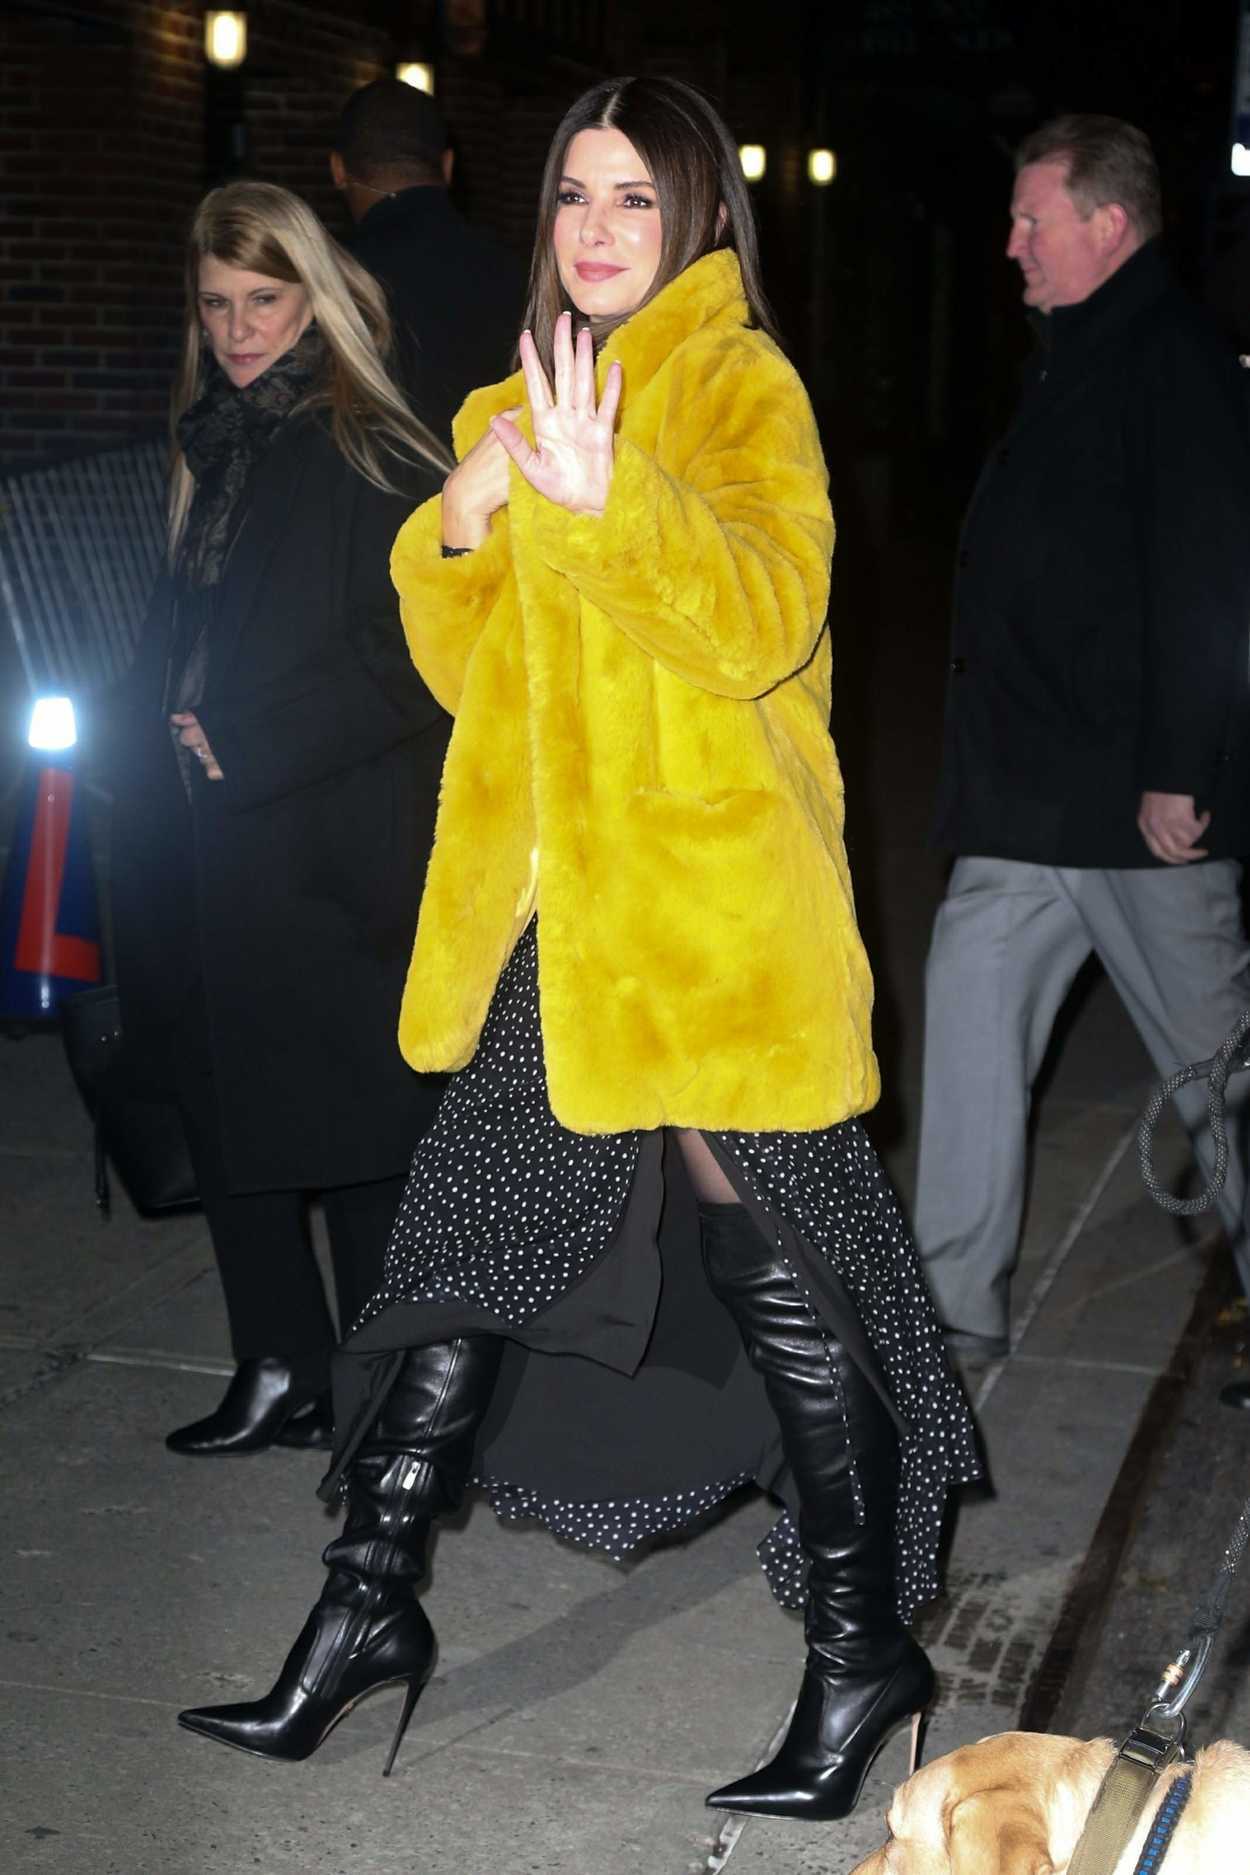 Sandra Bullock in a Short Yellow Fur Coat Arrives on The Late Show with